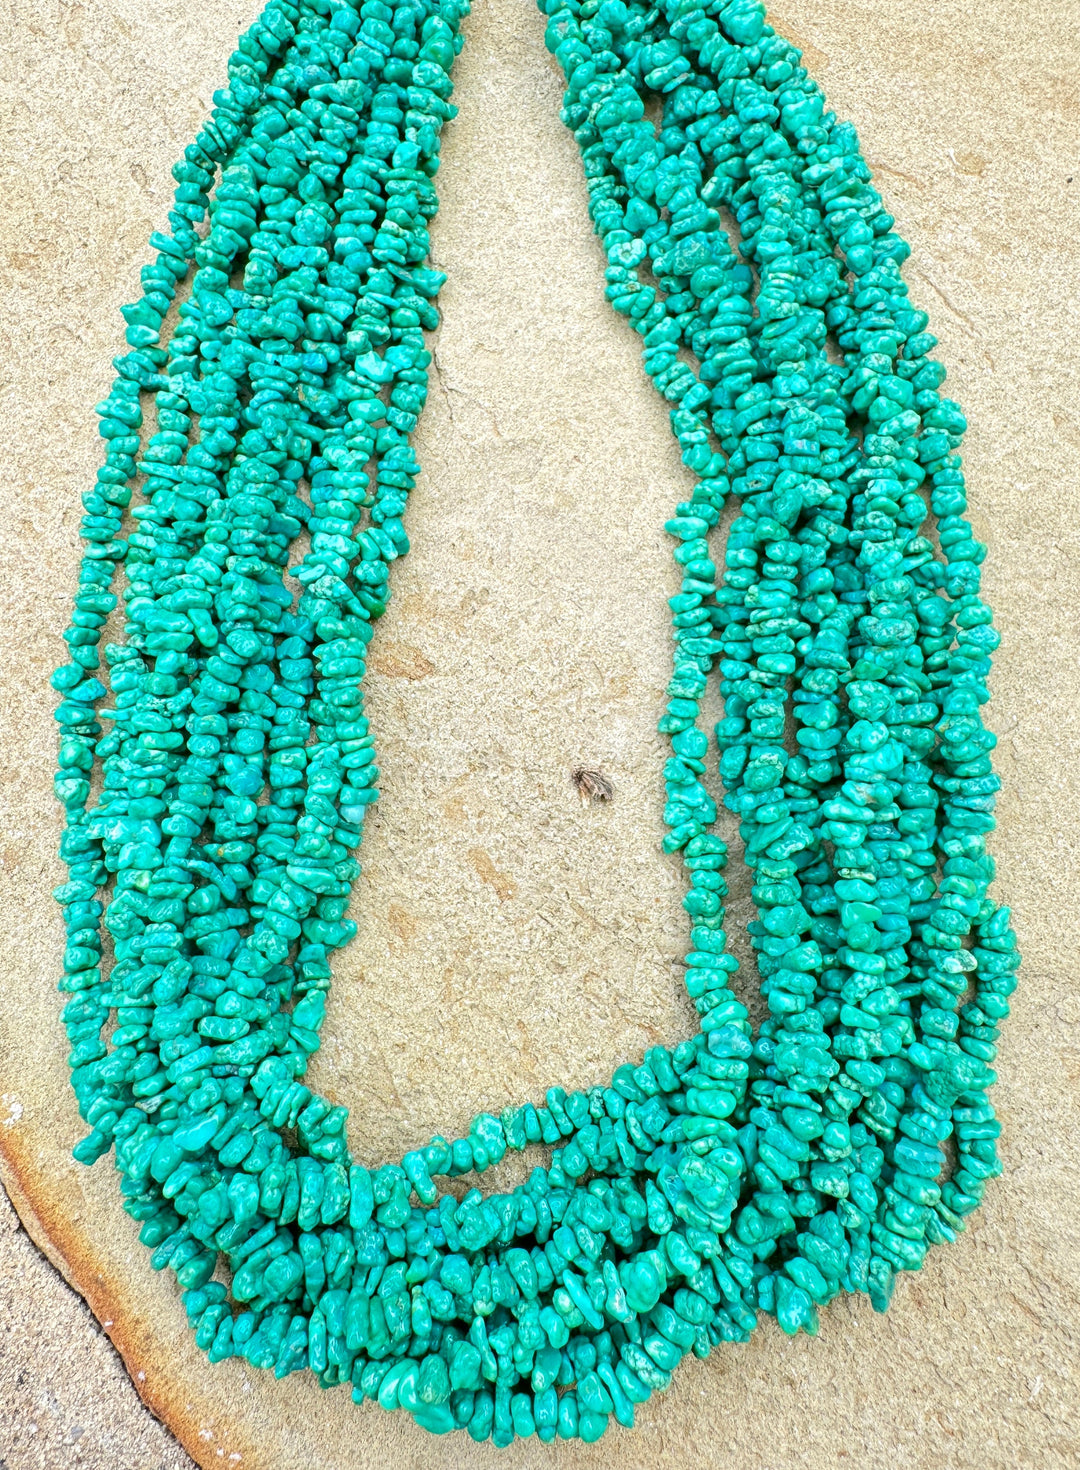 Emerald Valley (NV) Turquoise 4-5mm Chips 16 Inch Strand